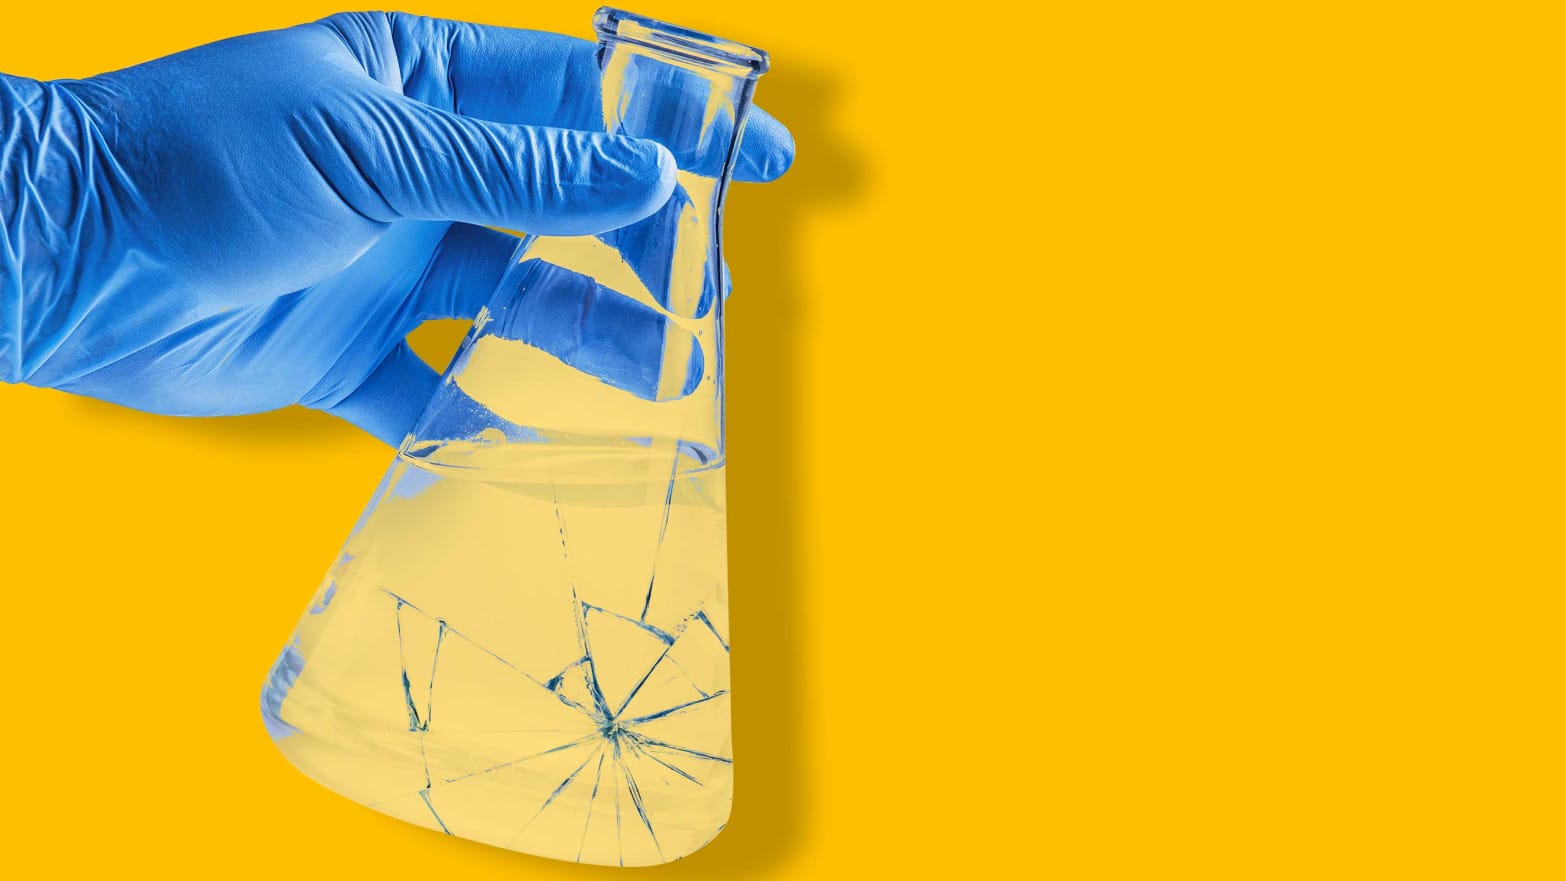 blue gloved hand holding beaker on yellow background president donald trump barack obama office of science and technology ostp